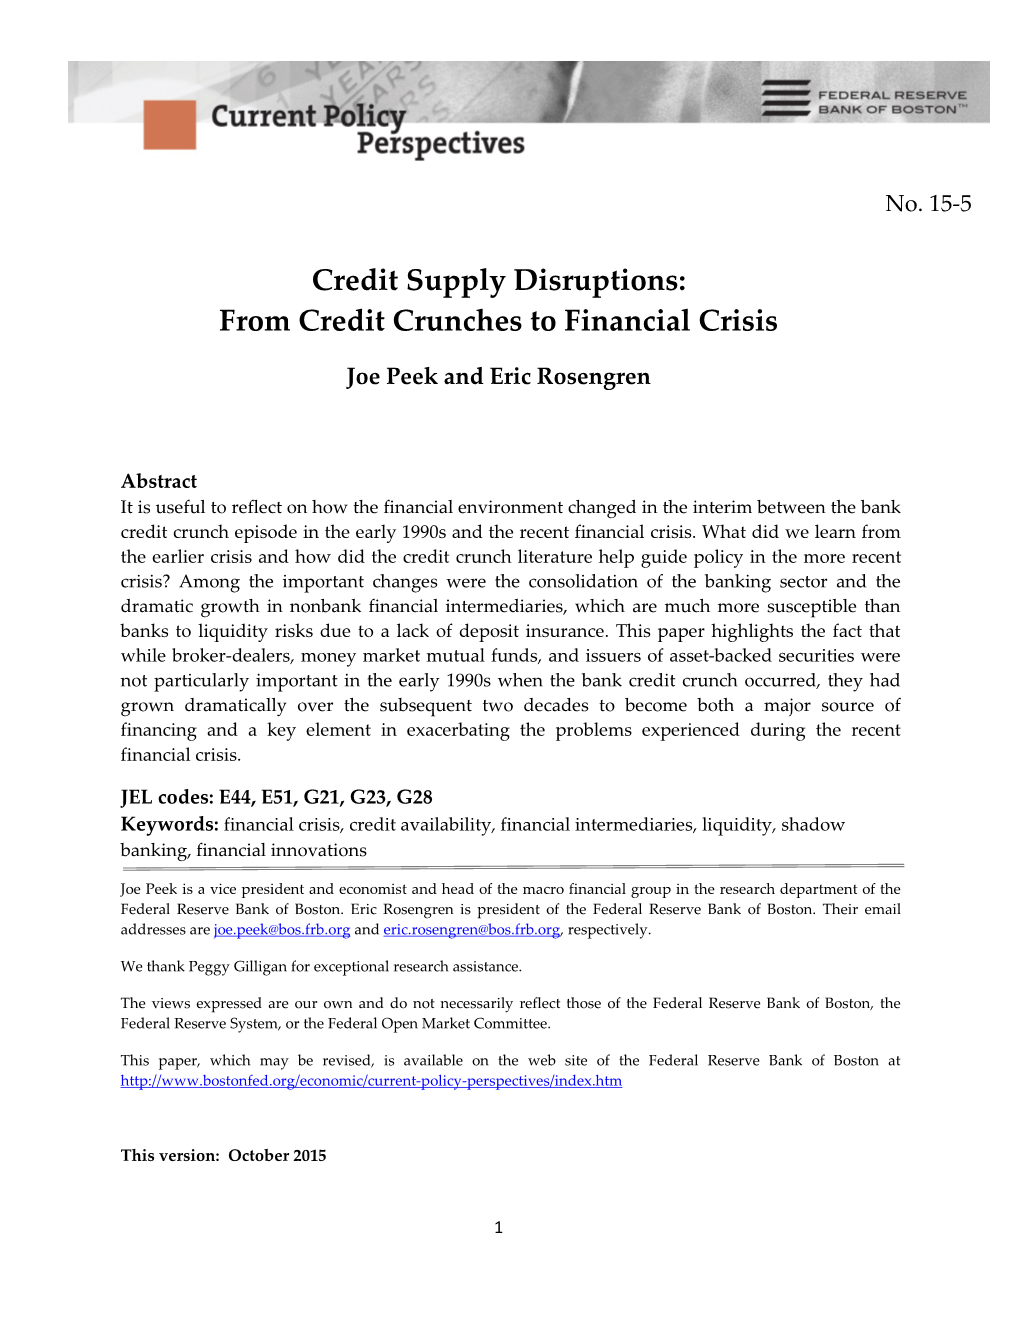 Credit Supply Disruptions: from Credit Crunches to Financial Crisis